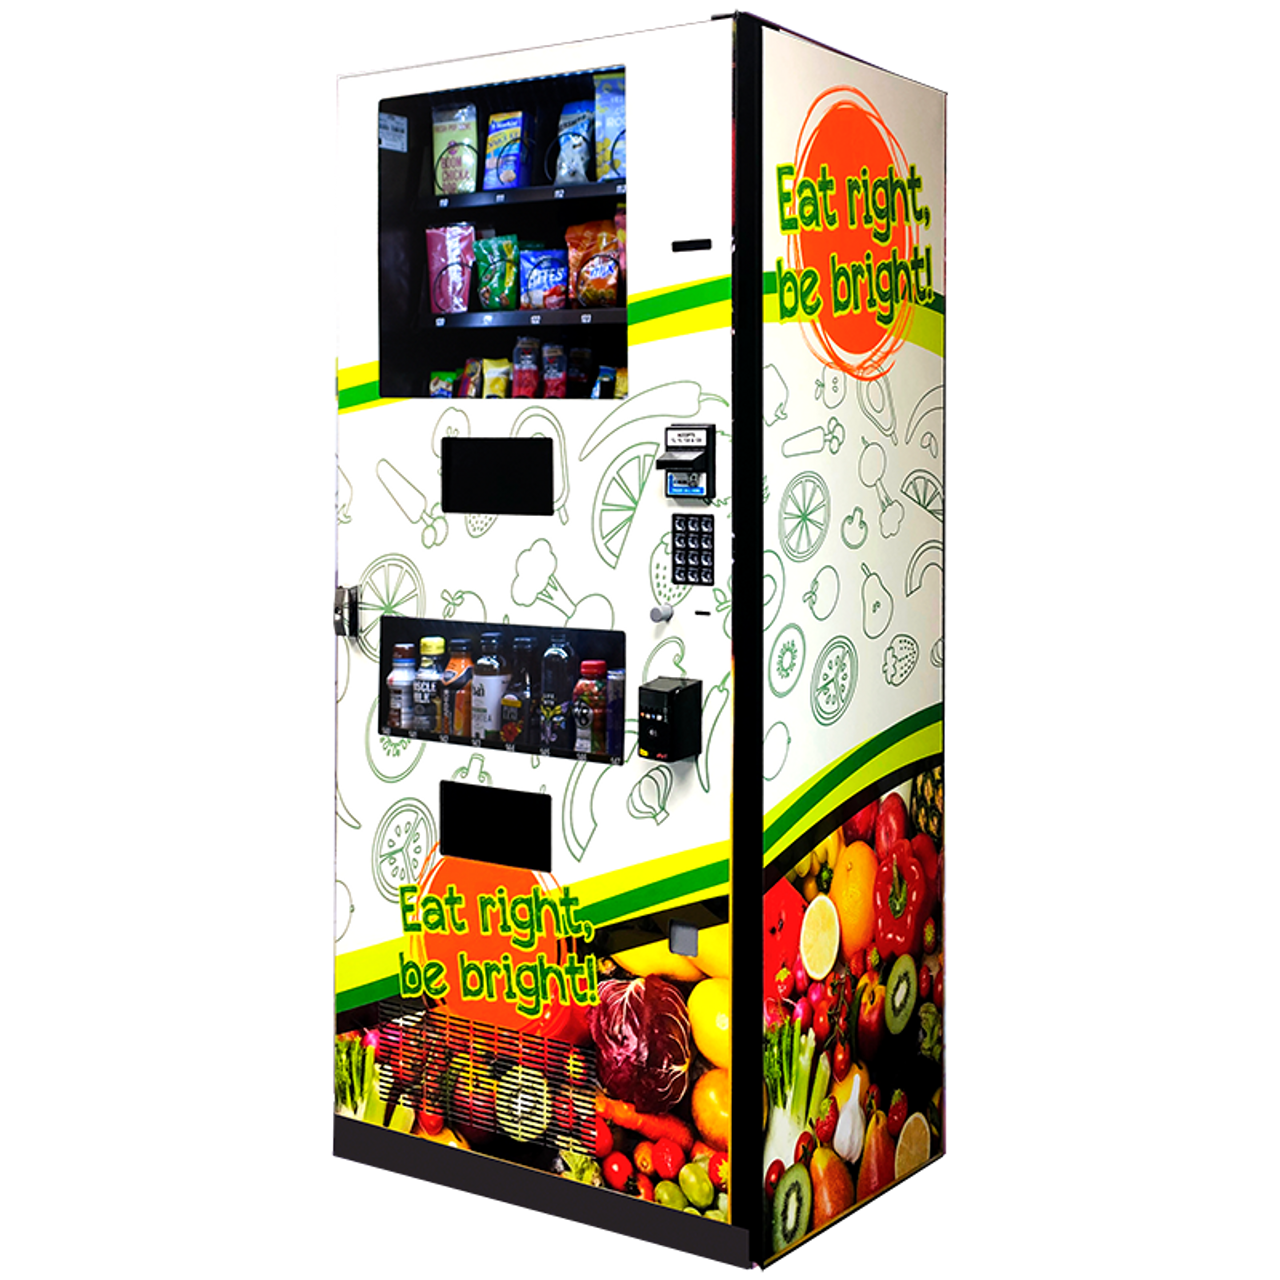 Vending Machines: 25-Second Delay Encourages Healthy Eating